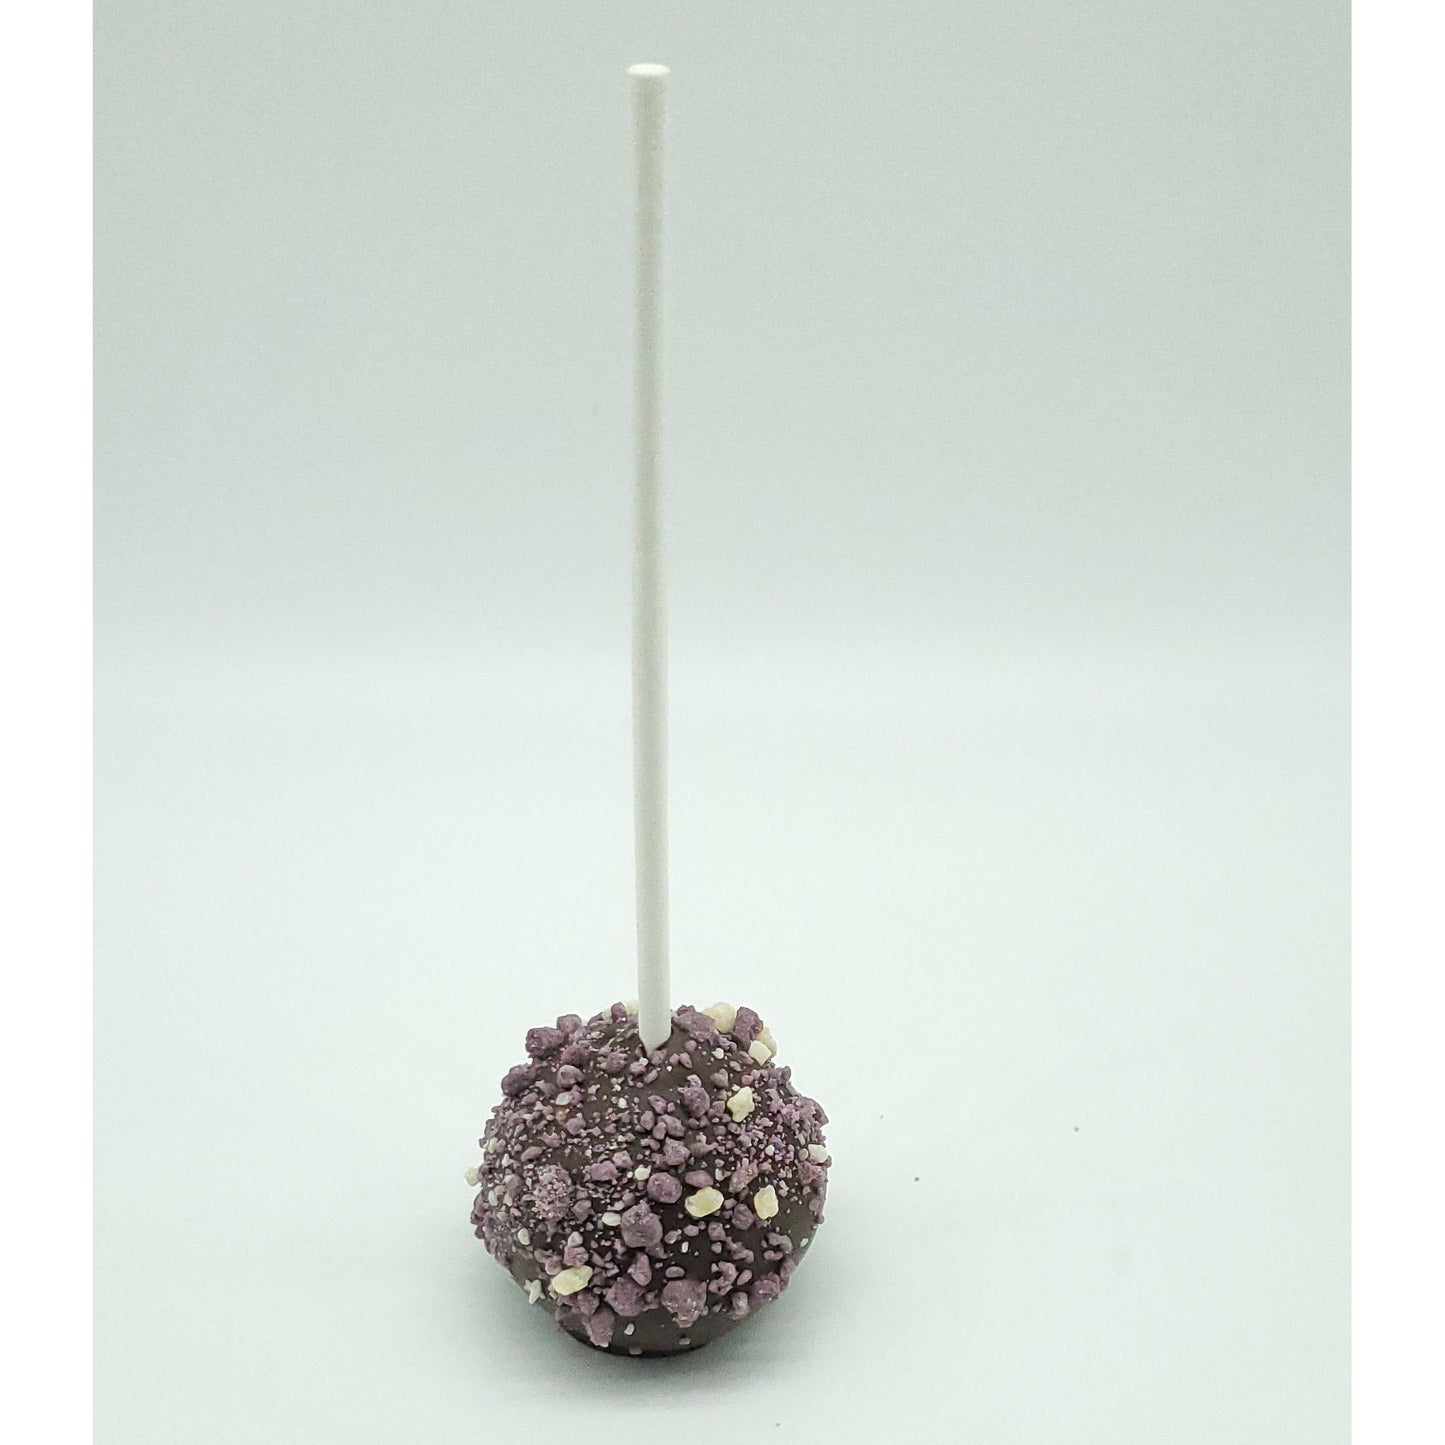 where to buy cake pops - chocolate blueberry flavor.